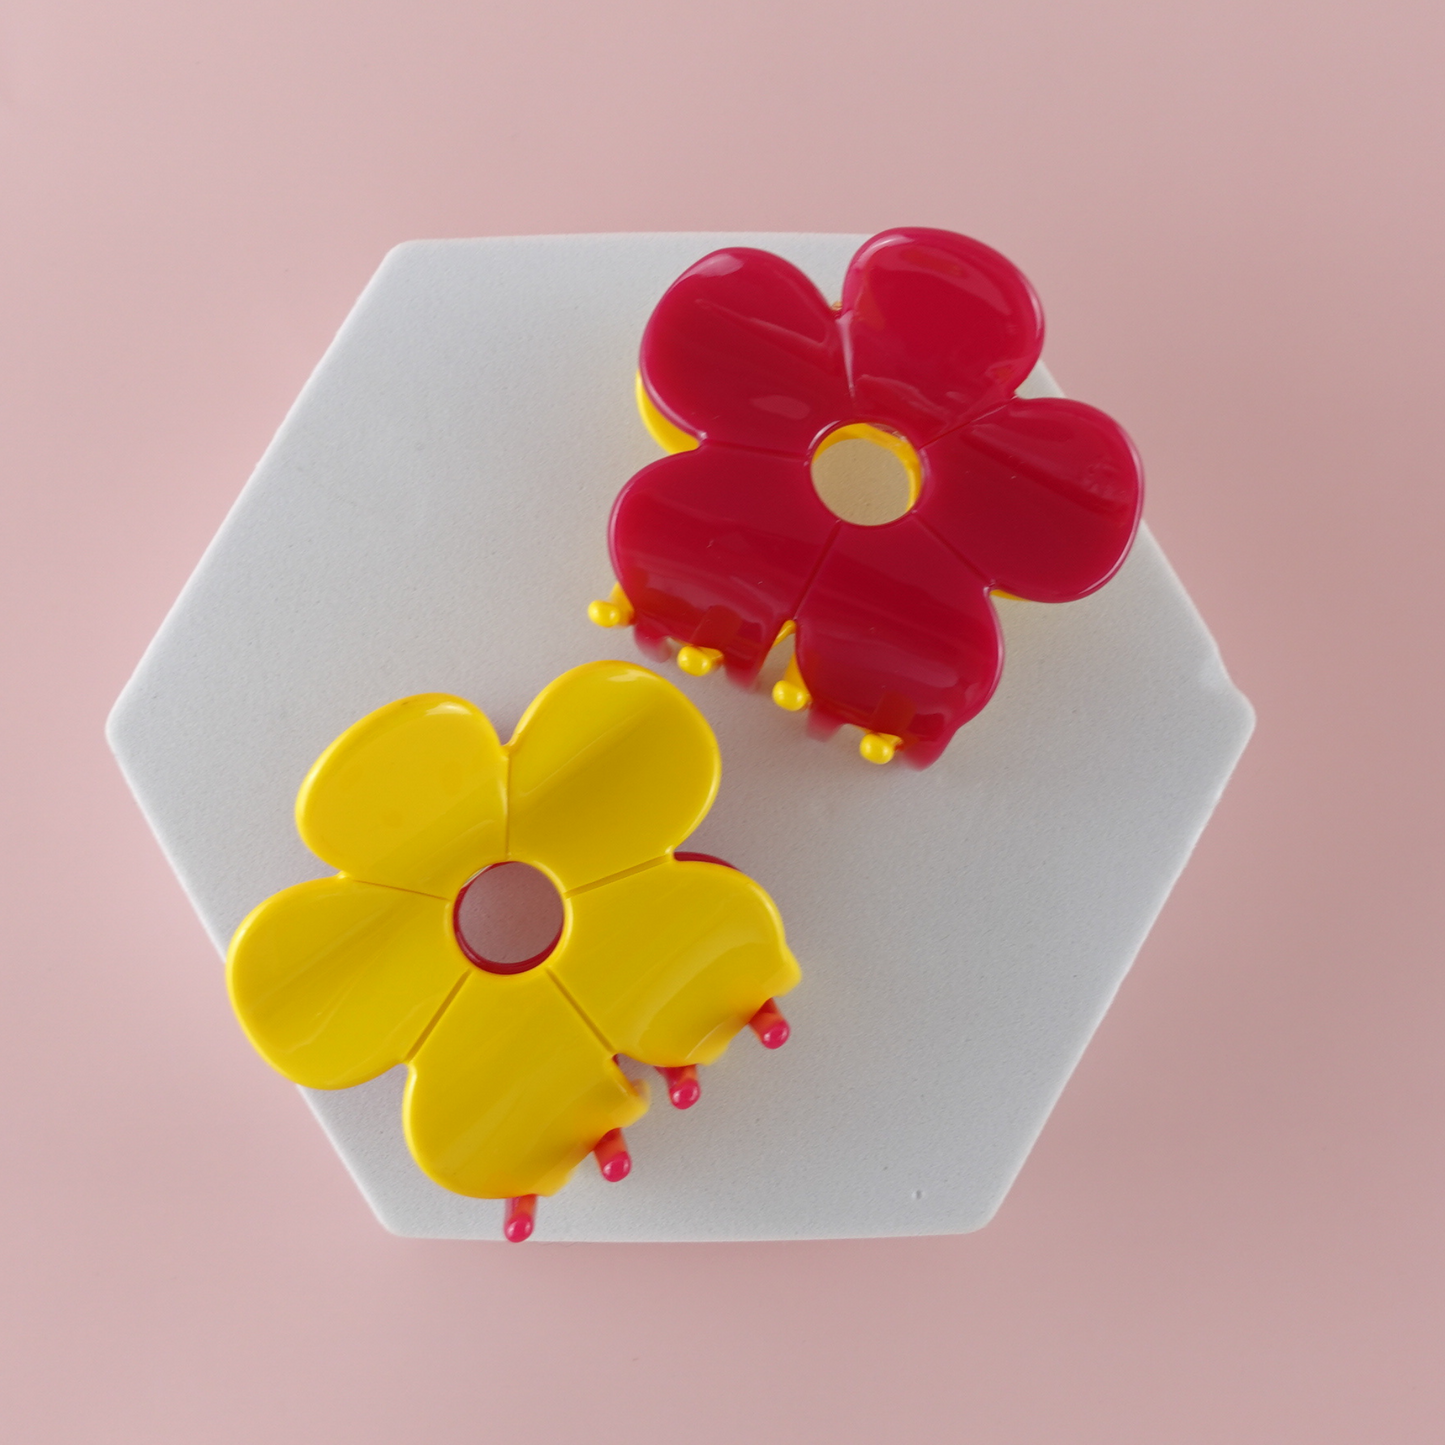 Hanami Cellulose Acetate Hair Claw Clips